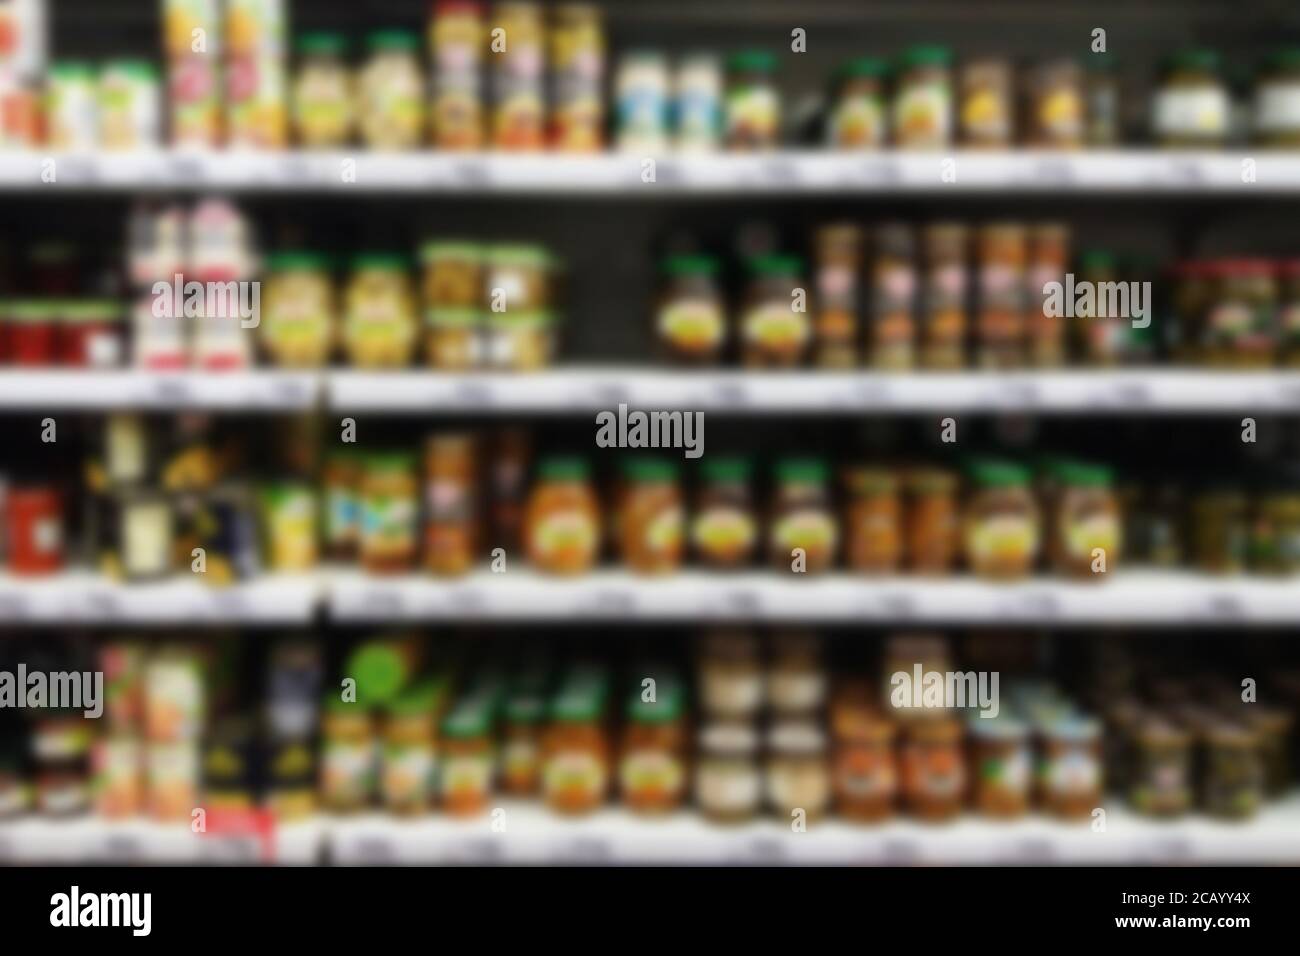 blurry supermarket selves with pickled vegetables and mushrooms in jars Stock Photo